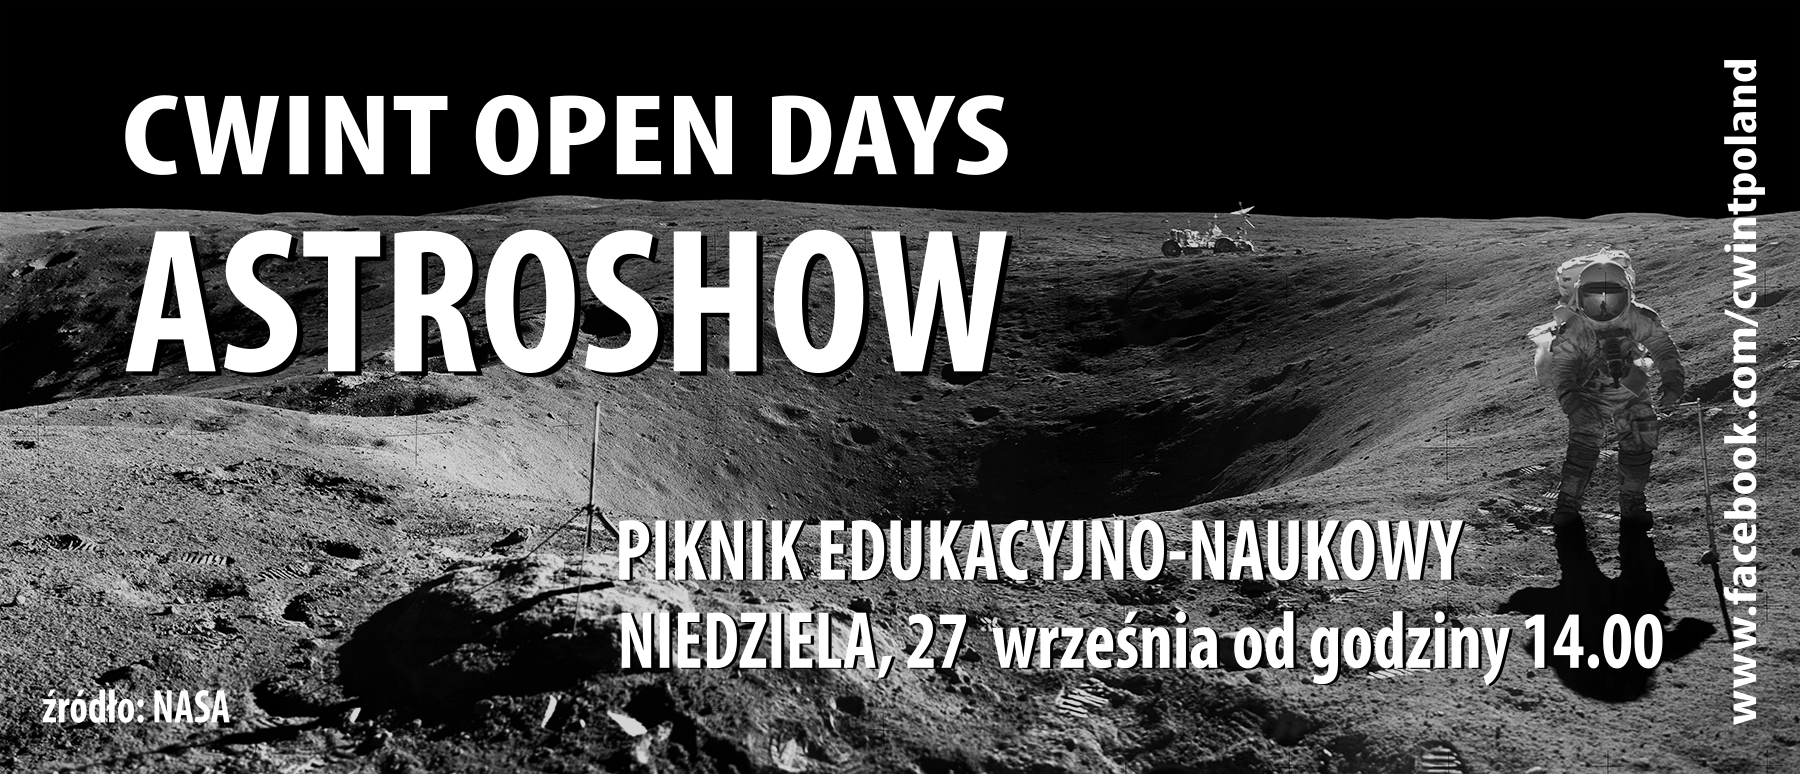 CWiNT Open Days Astroshow 2